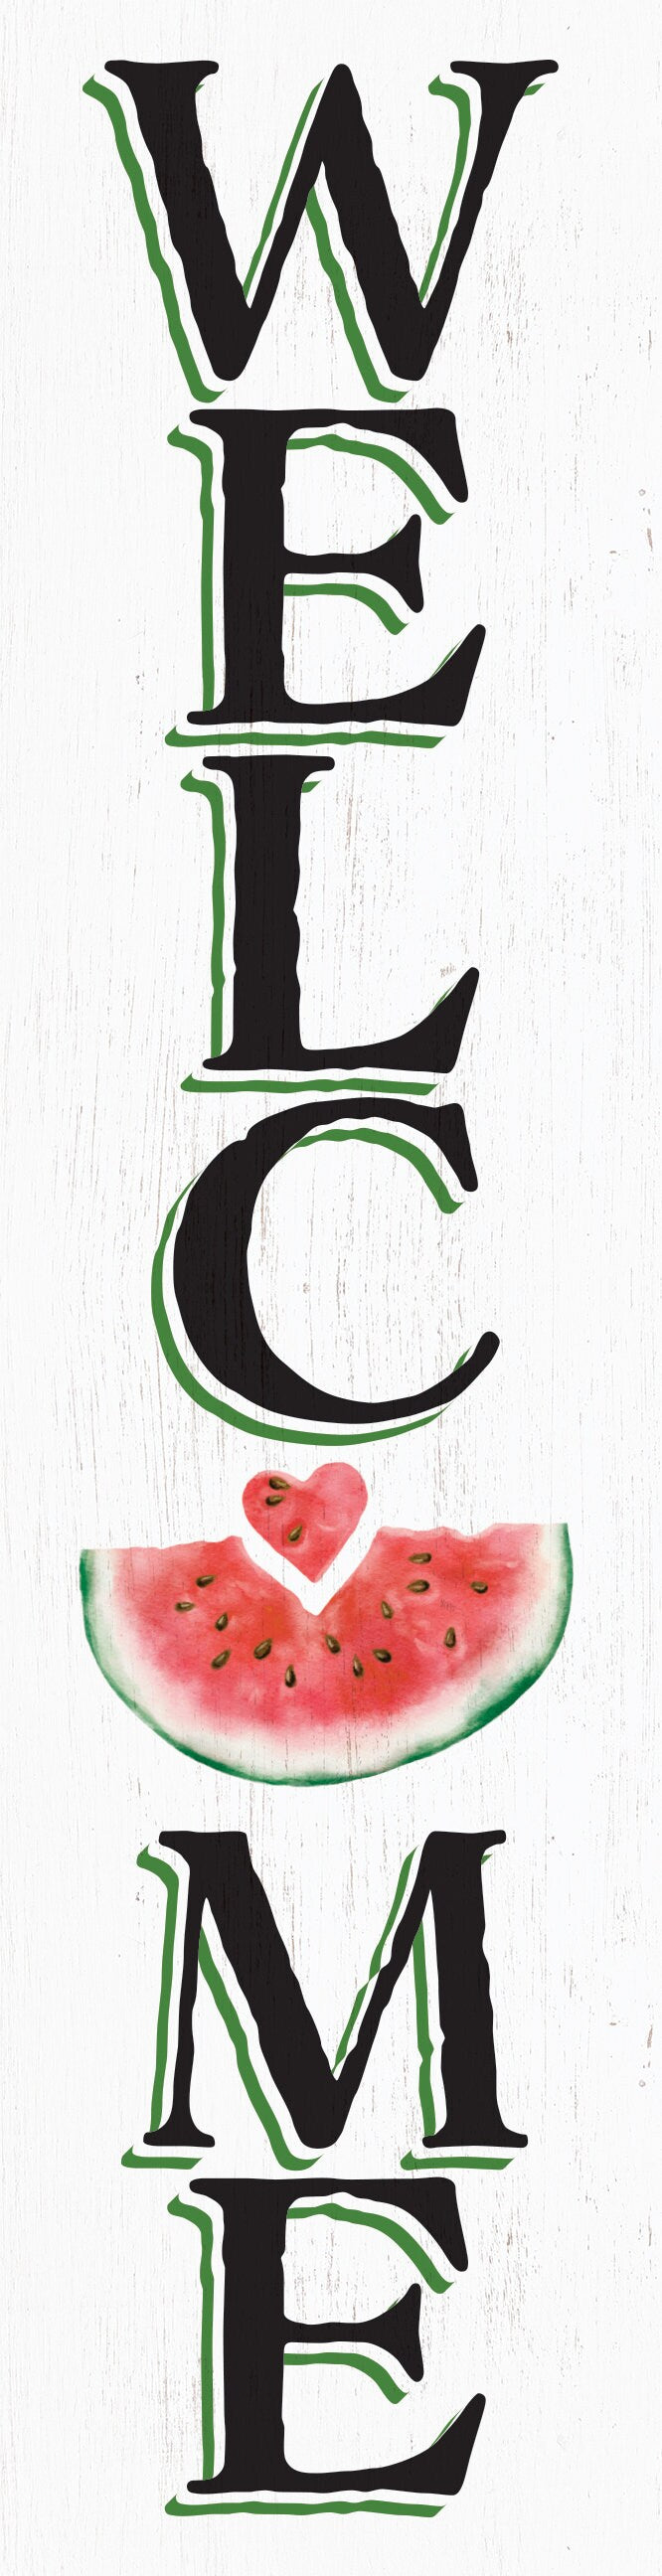 36in Welcome Sign with Watermelon Pattern - Front Door Porch Standing Decor - Charming Summer Design for Home Entryway, Great Gift Idea